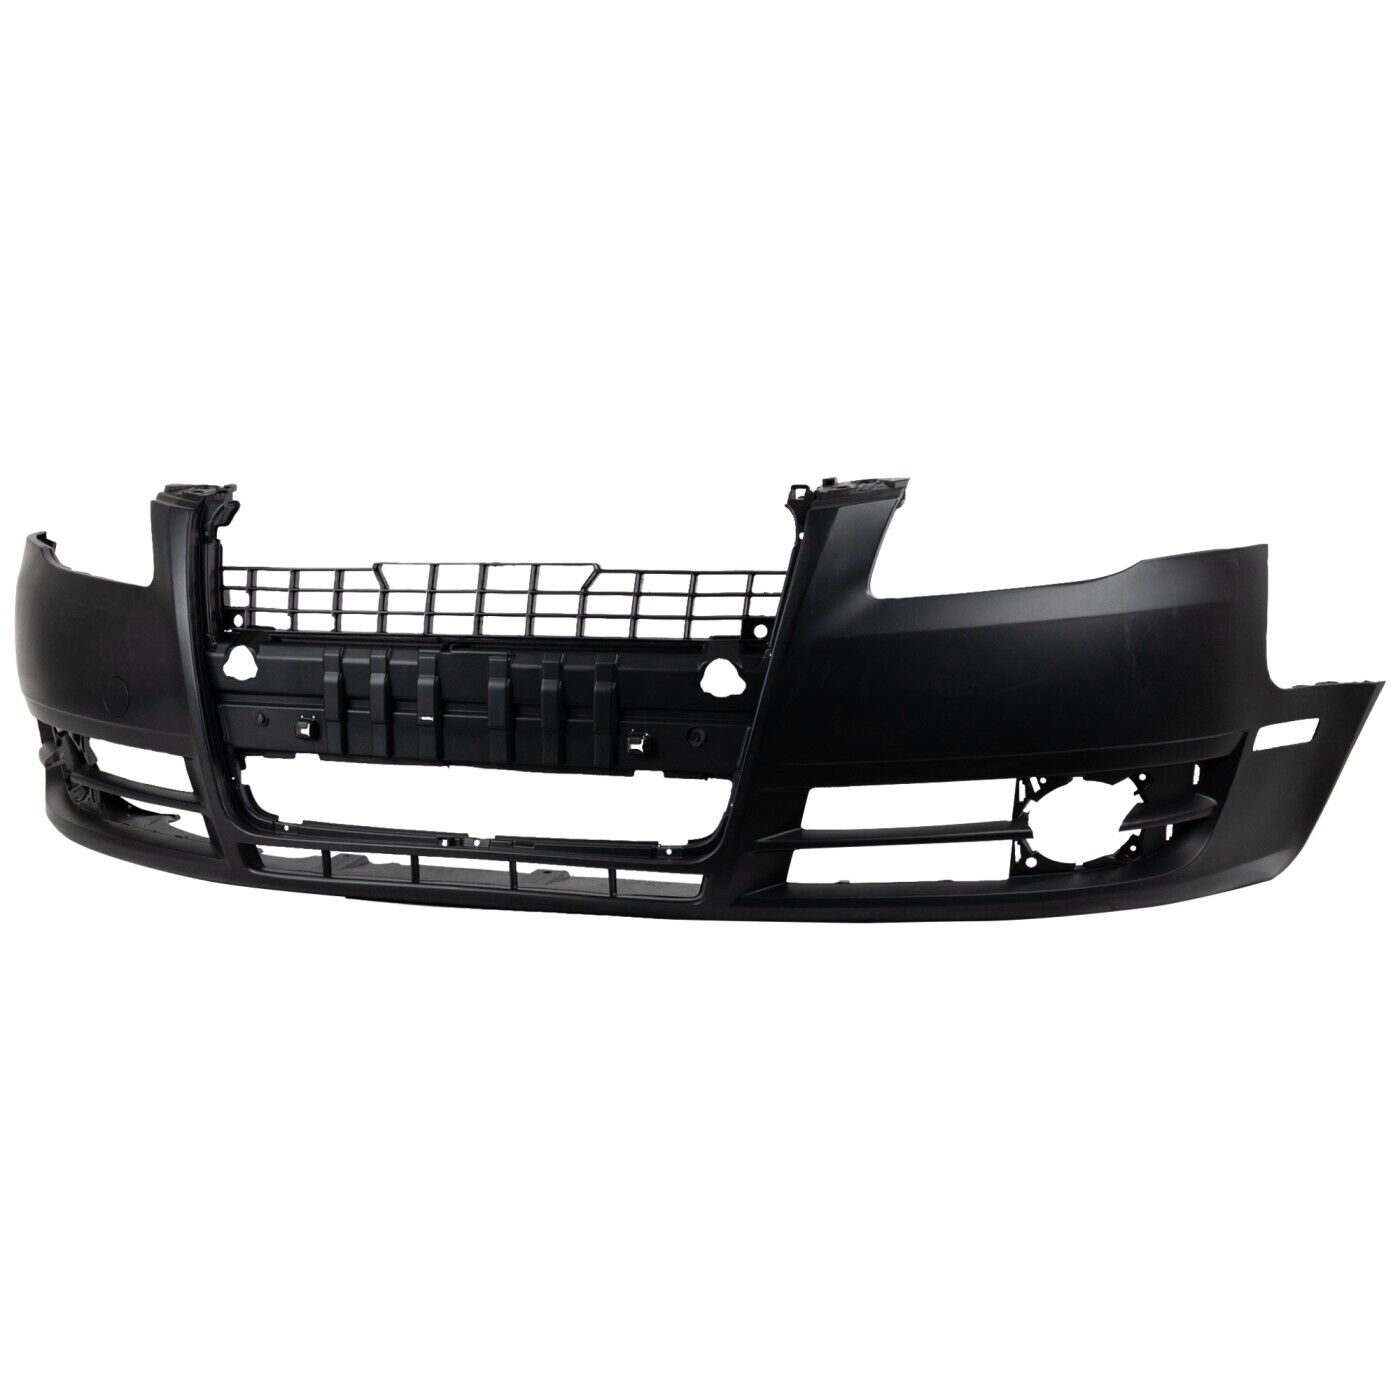 Front Bumper Cover For 2005-2009 Audi A4 Quattro and A4 07-09 S4 Primed Plastic